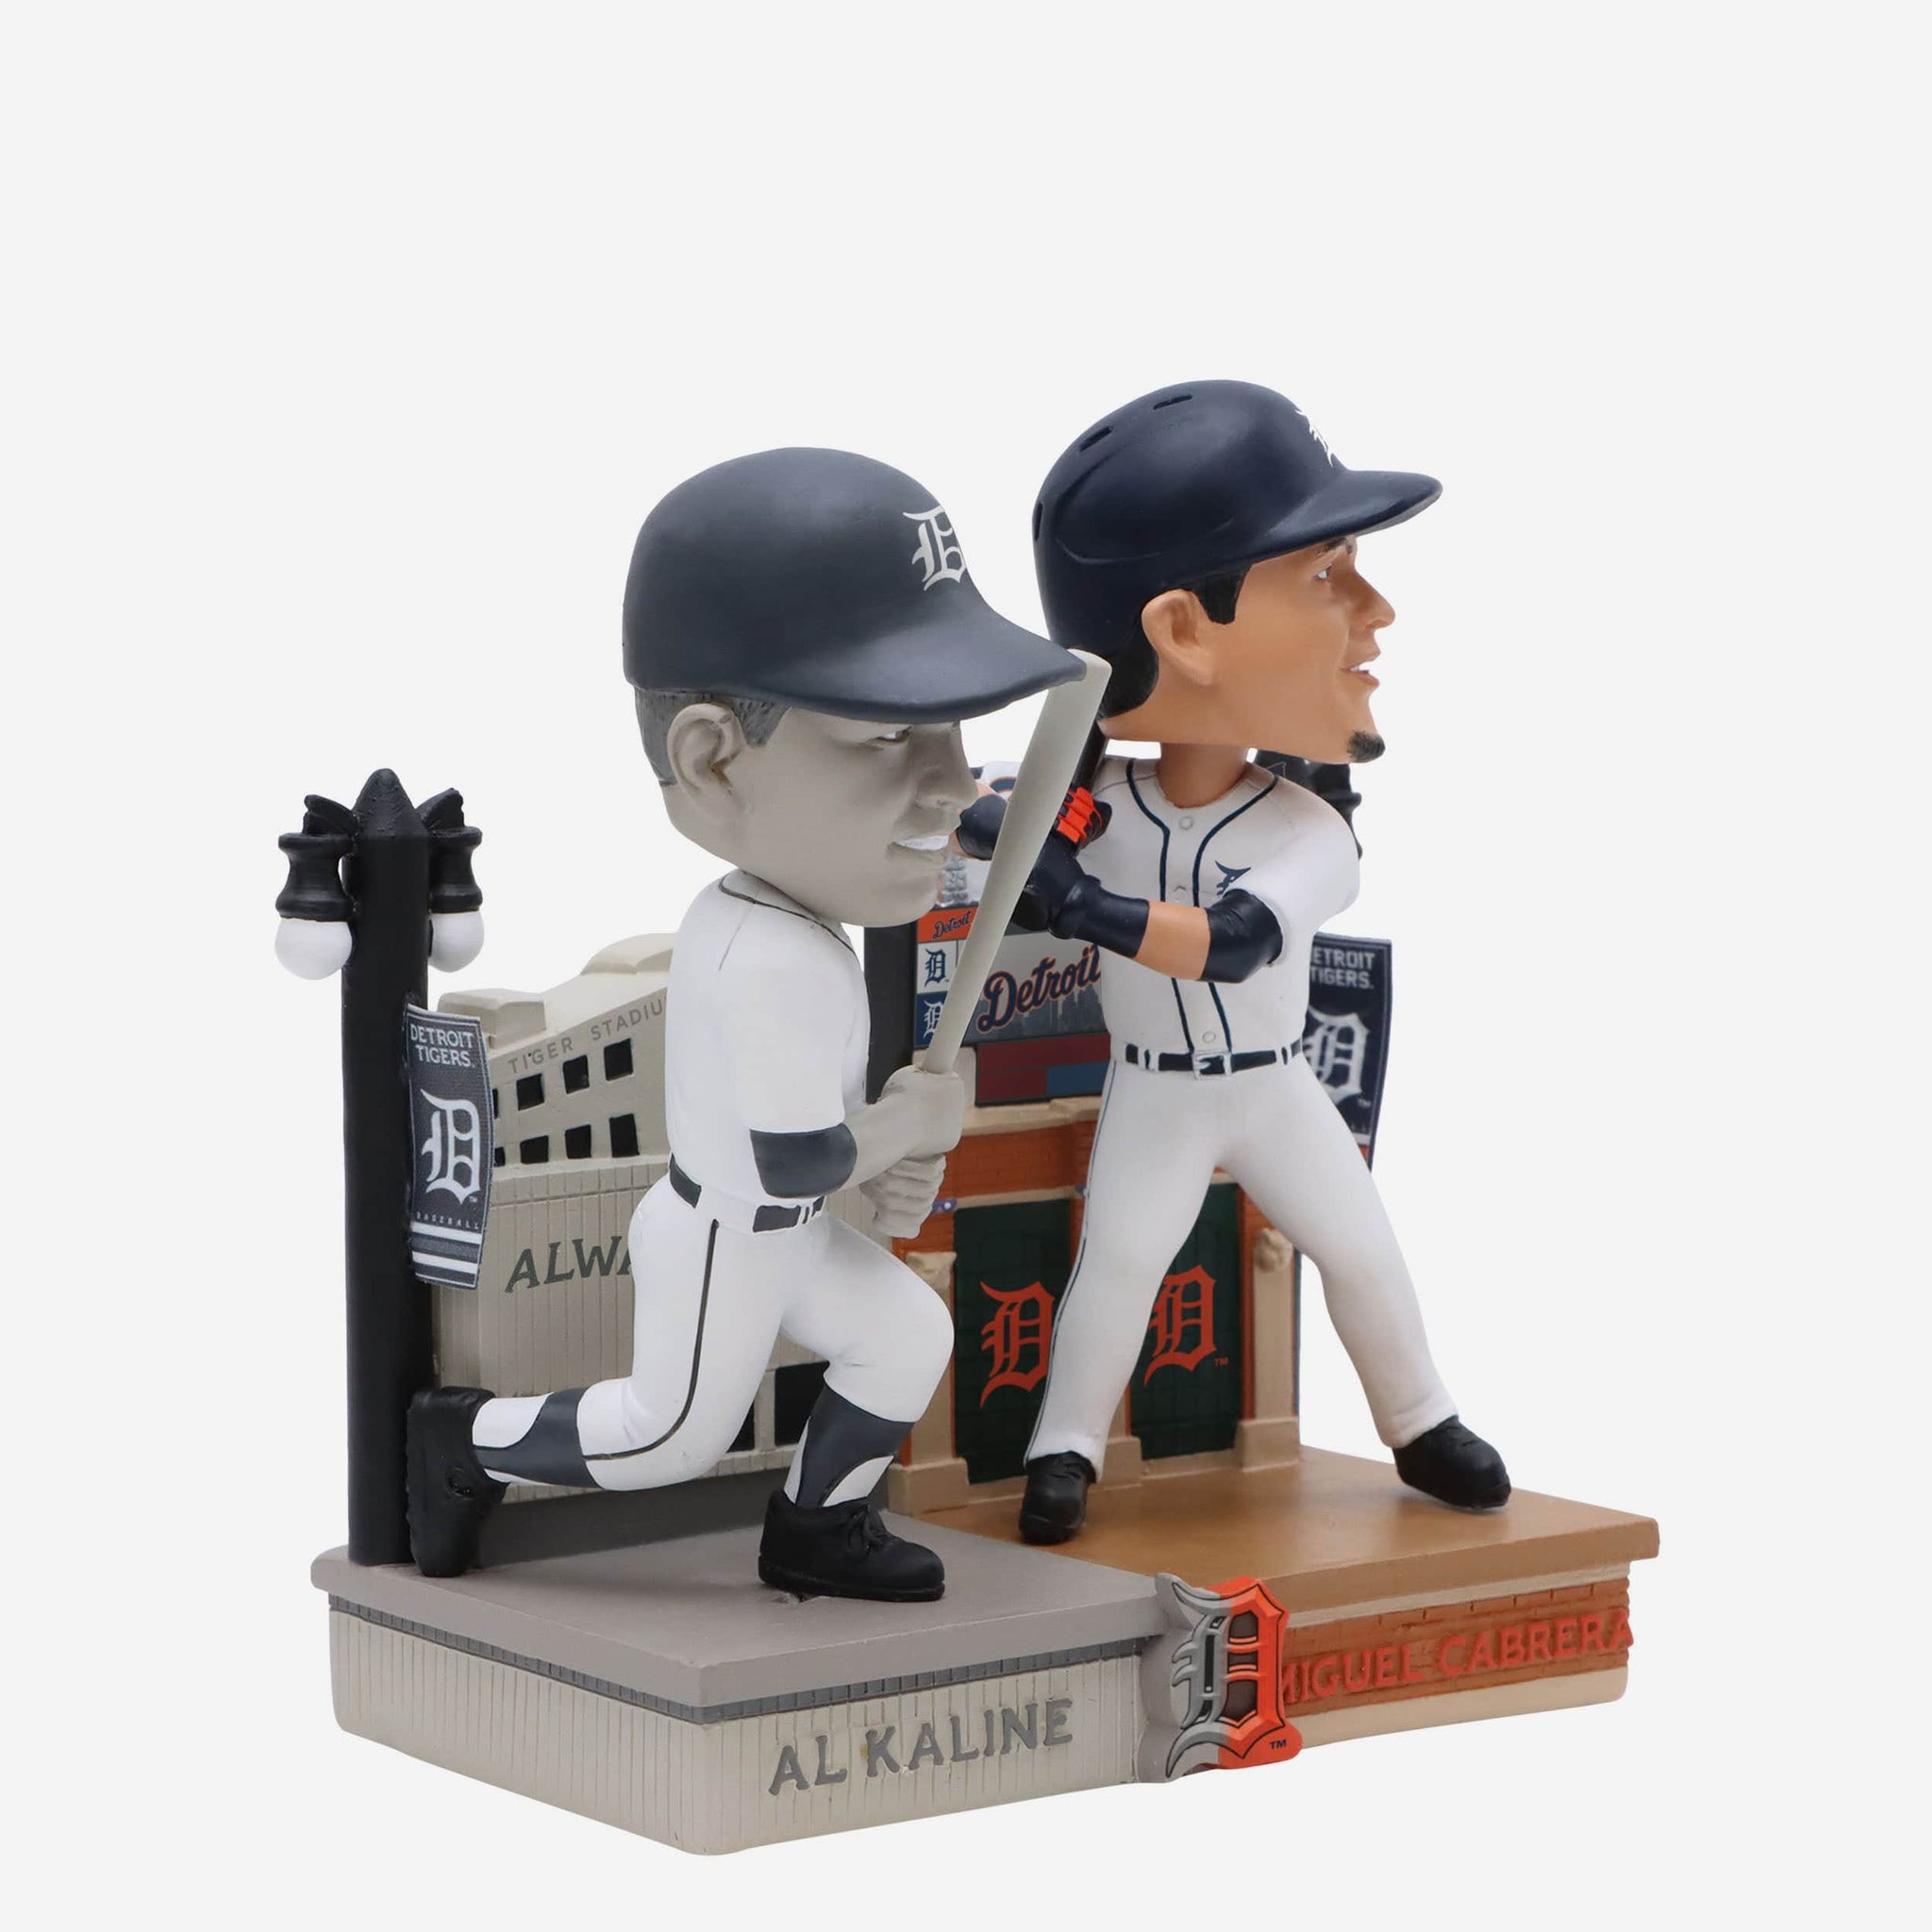 Official Detroit Tigers Bobbleheads, Tigers Figurines, Vintage Bobbleheads